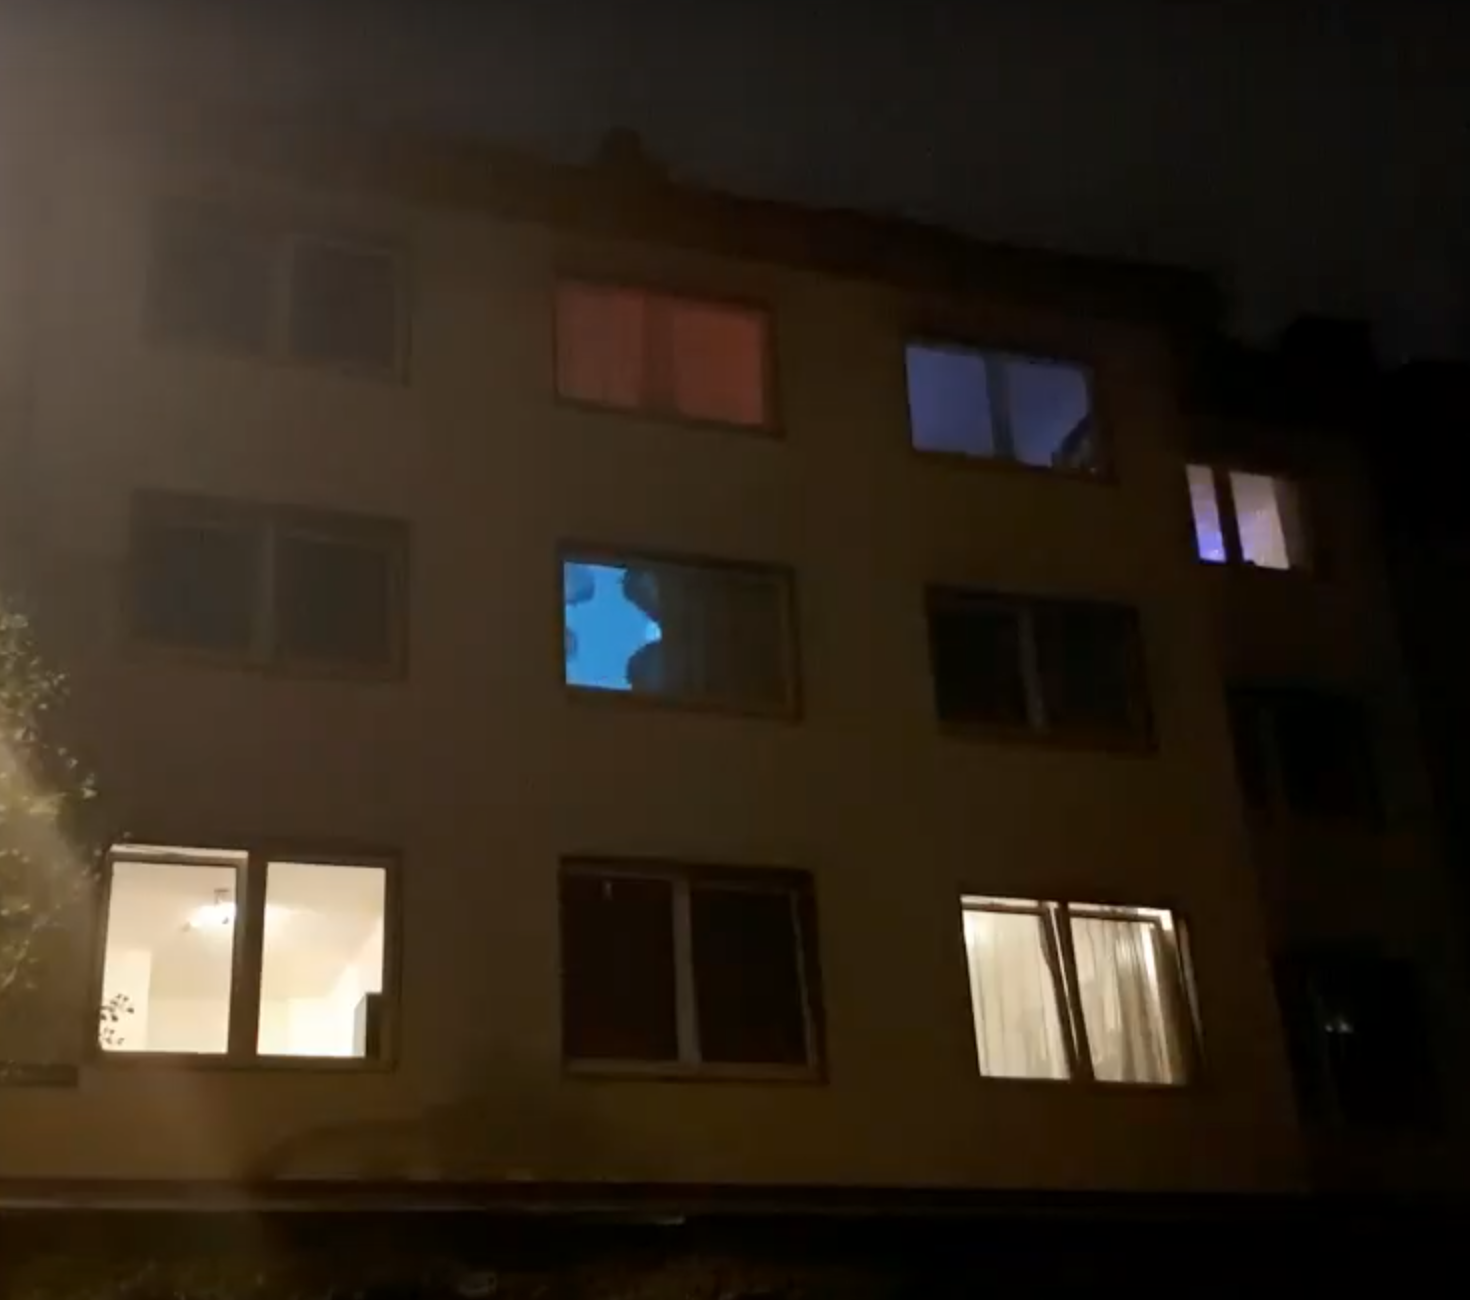 Jeesoo Hong, PASSING THROUGH, live stream from Cologne for LIGHT WINDOWS